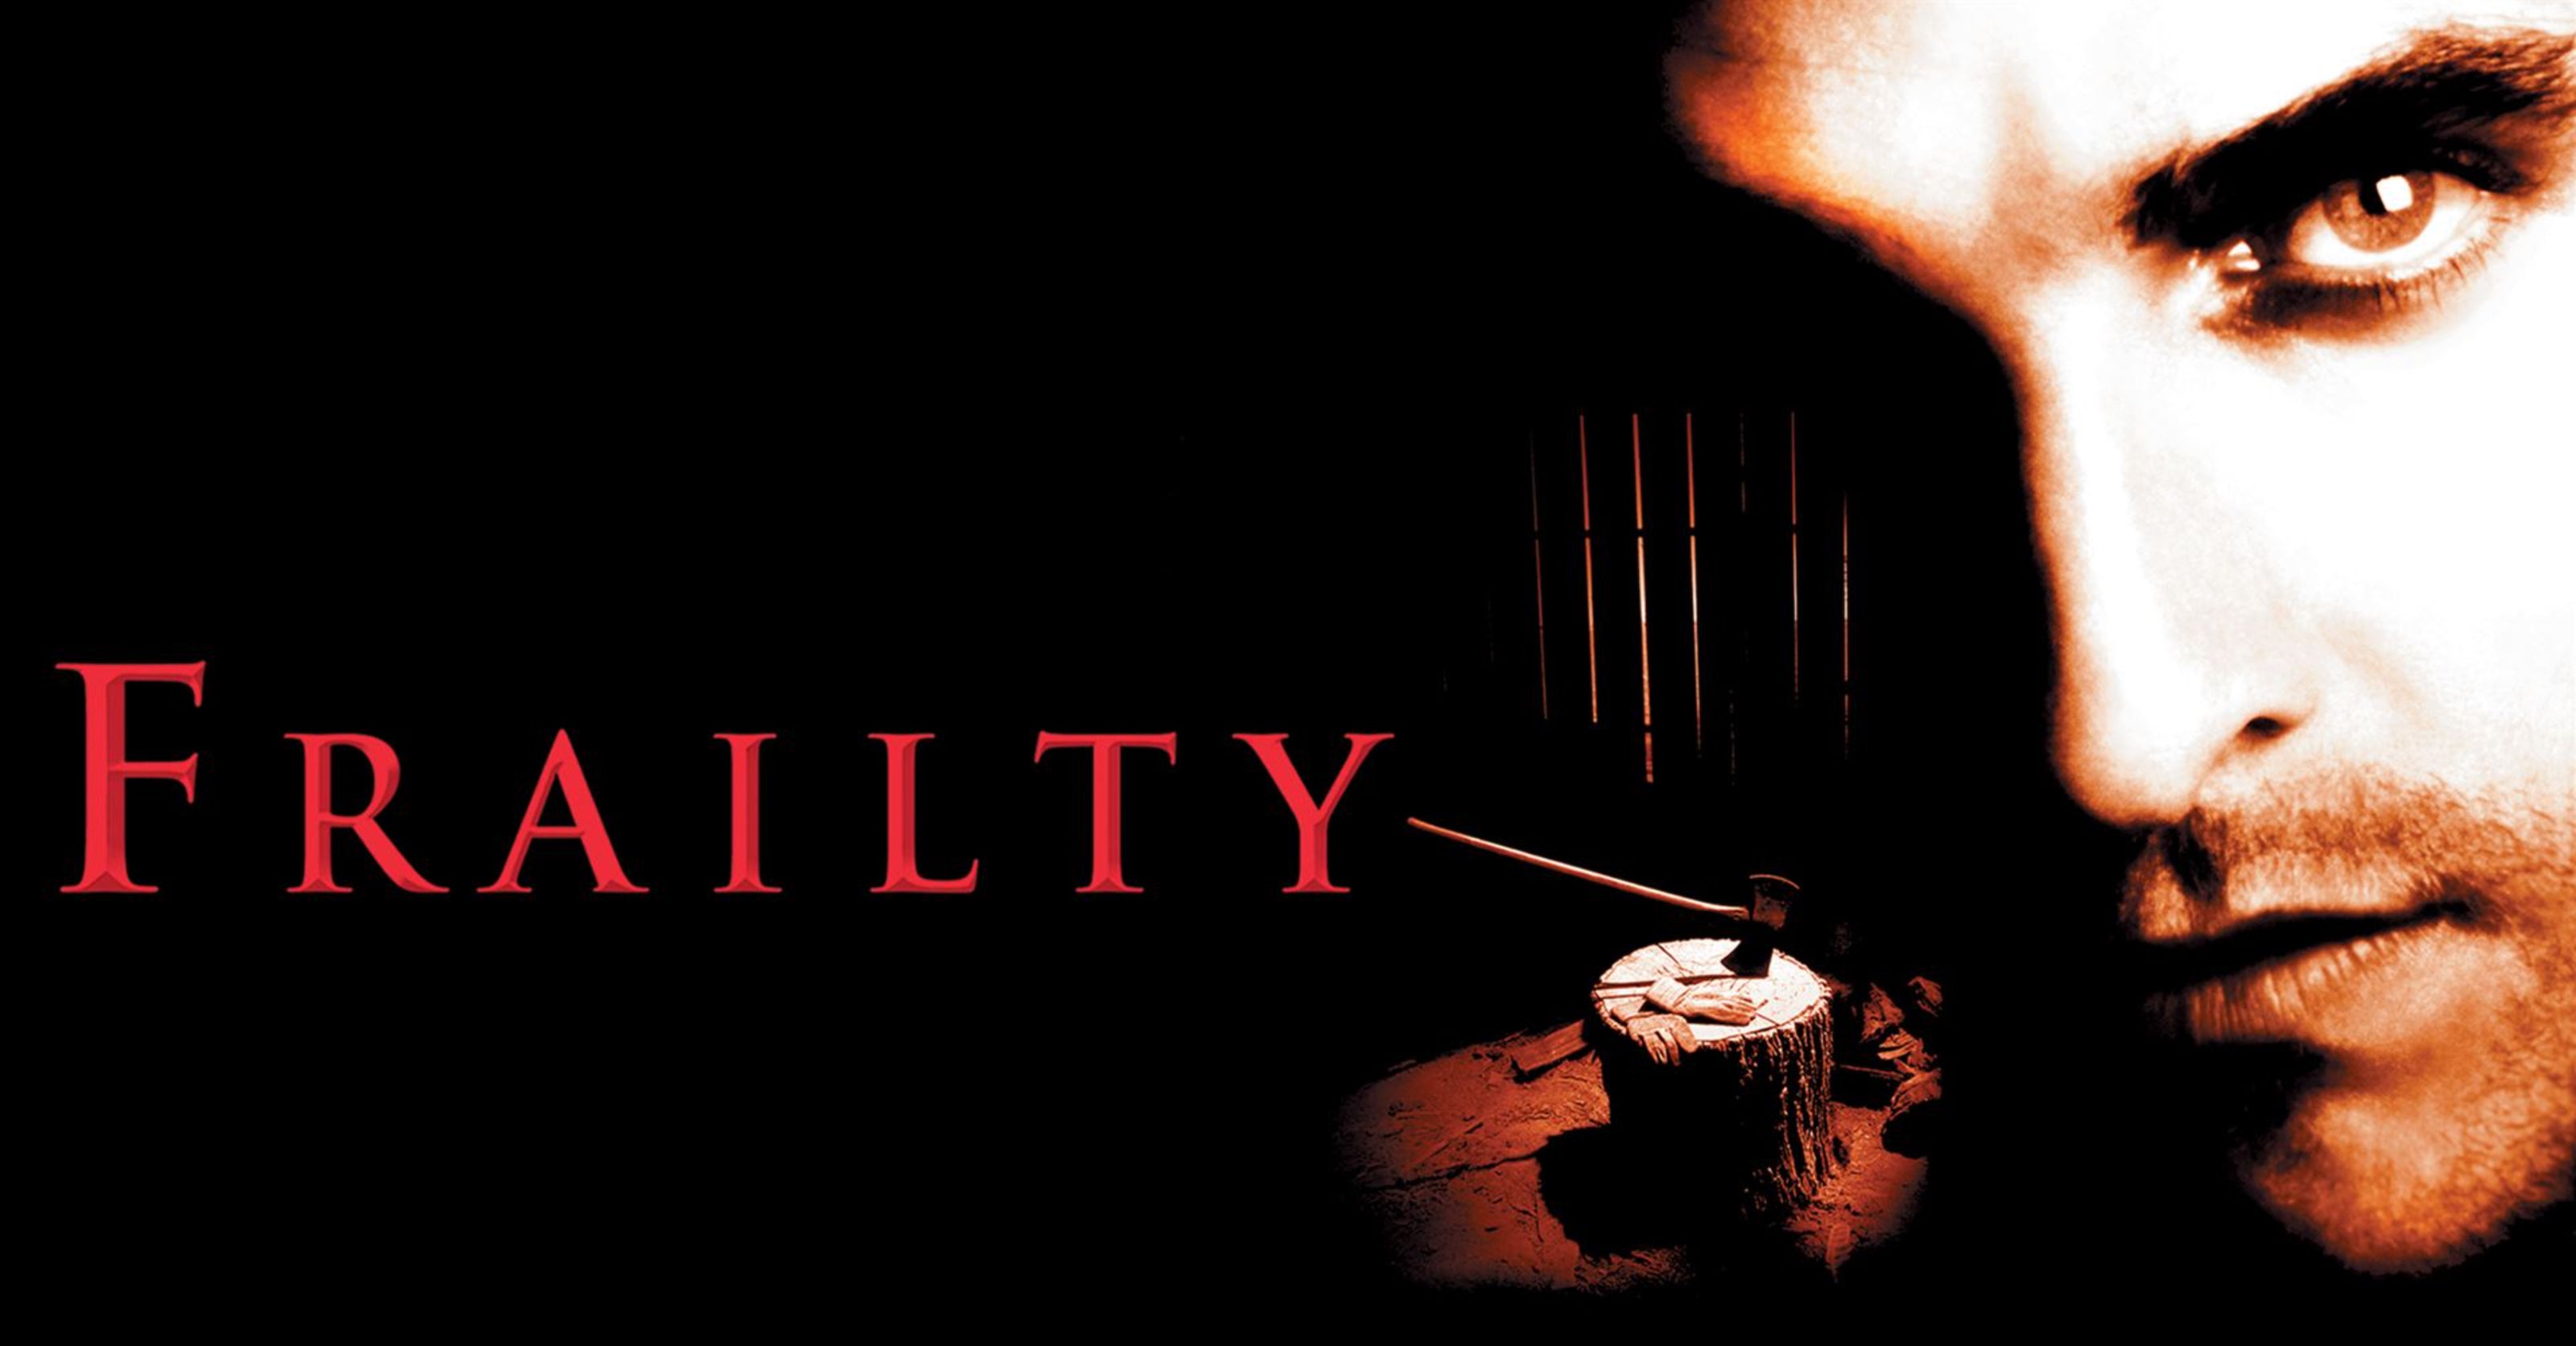 Frailty Script Screenplay - Image of Movie Poster